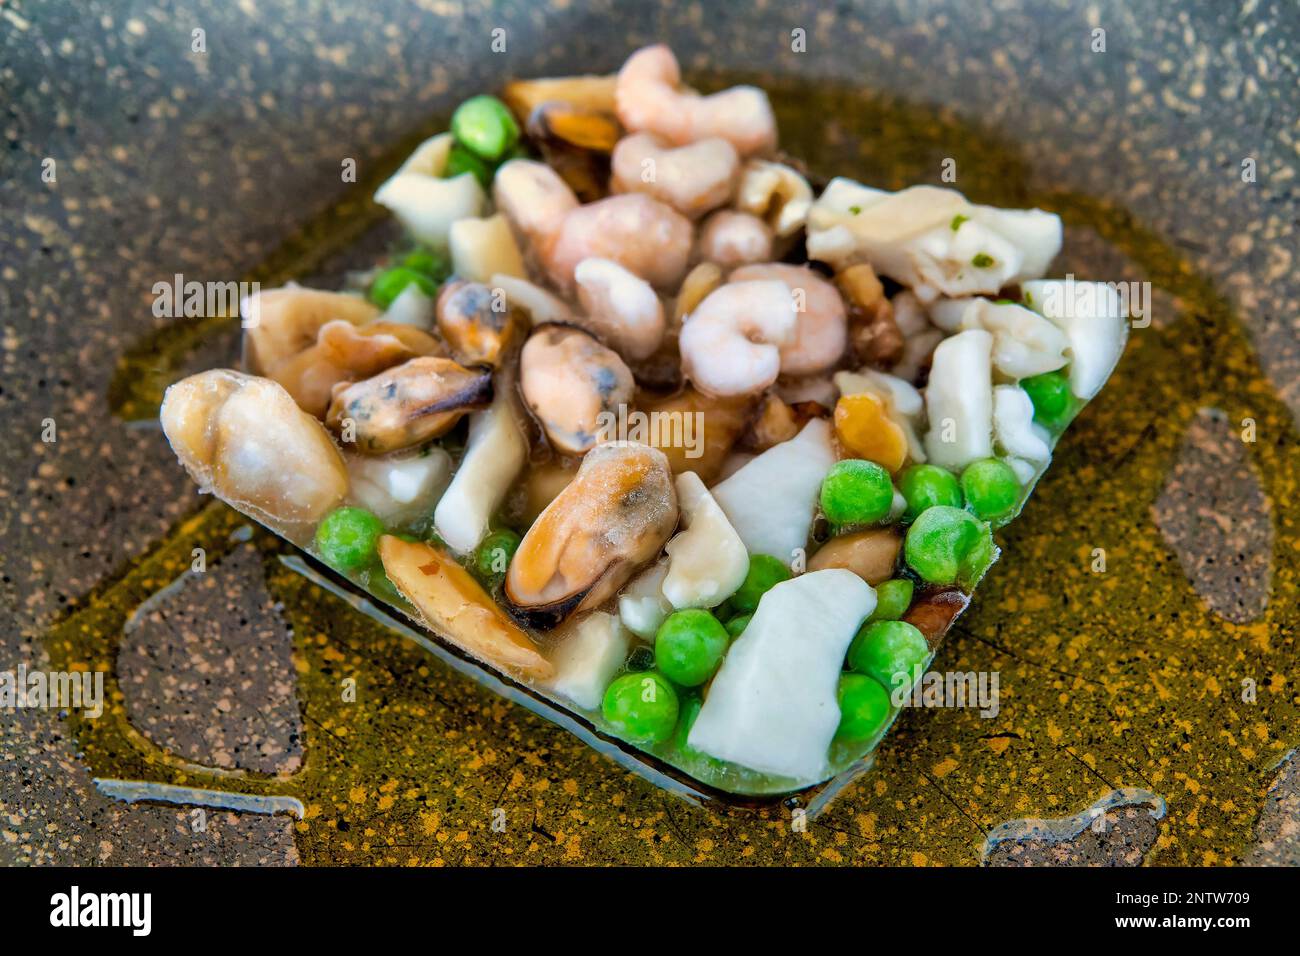 Cooking frozen food on a pan Stock Photo